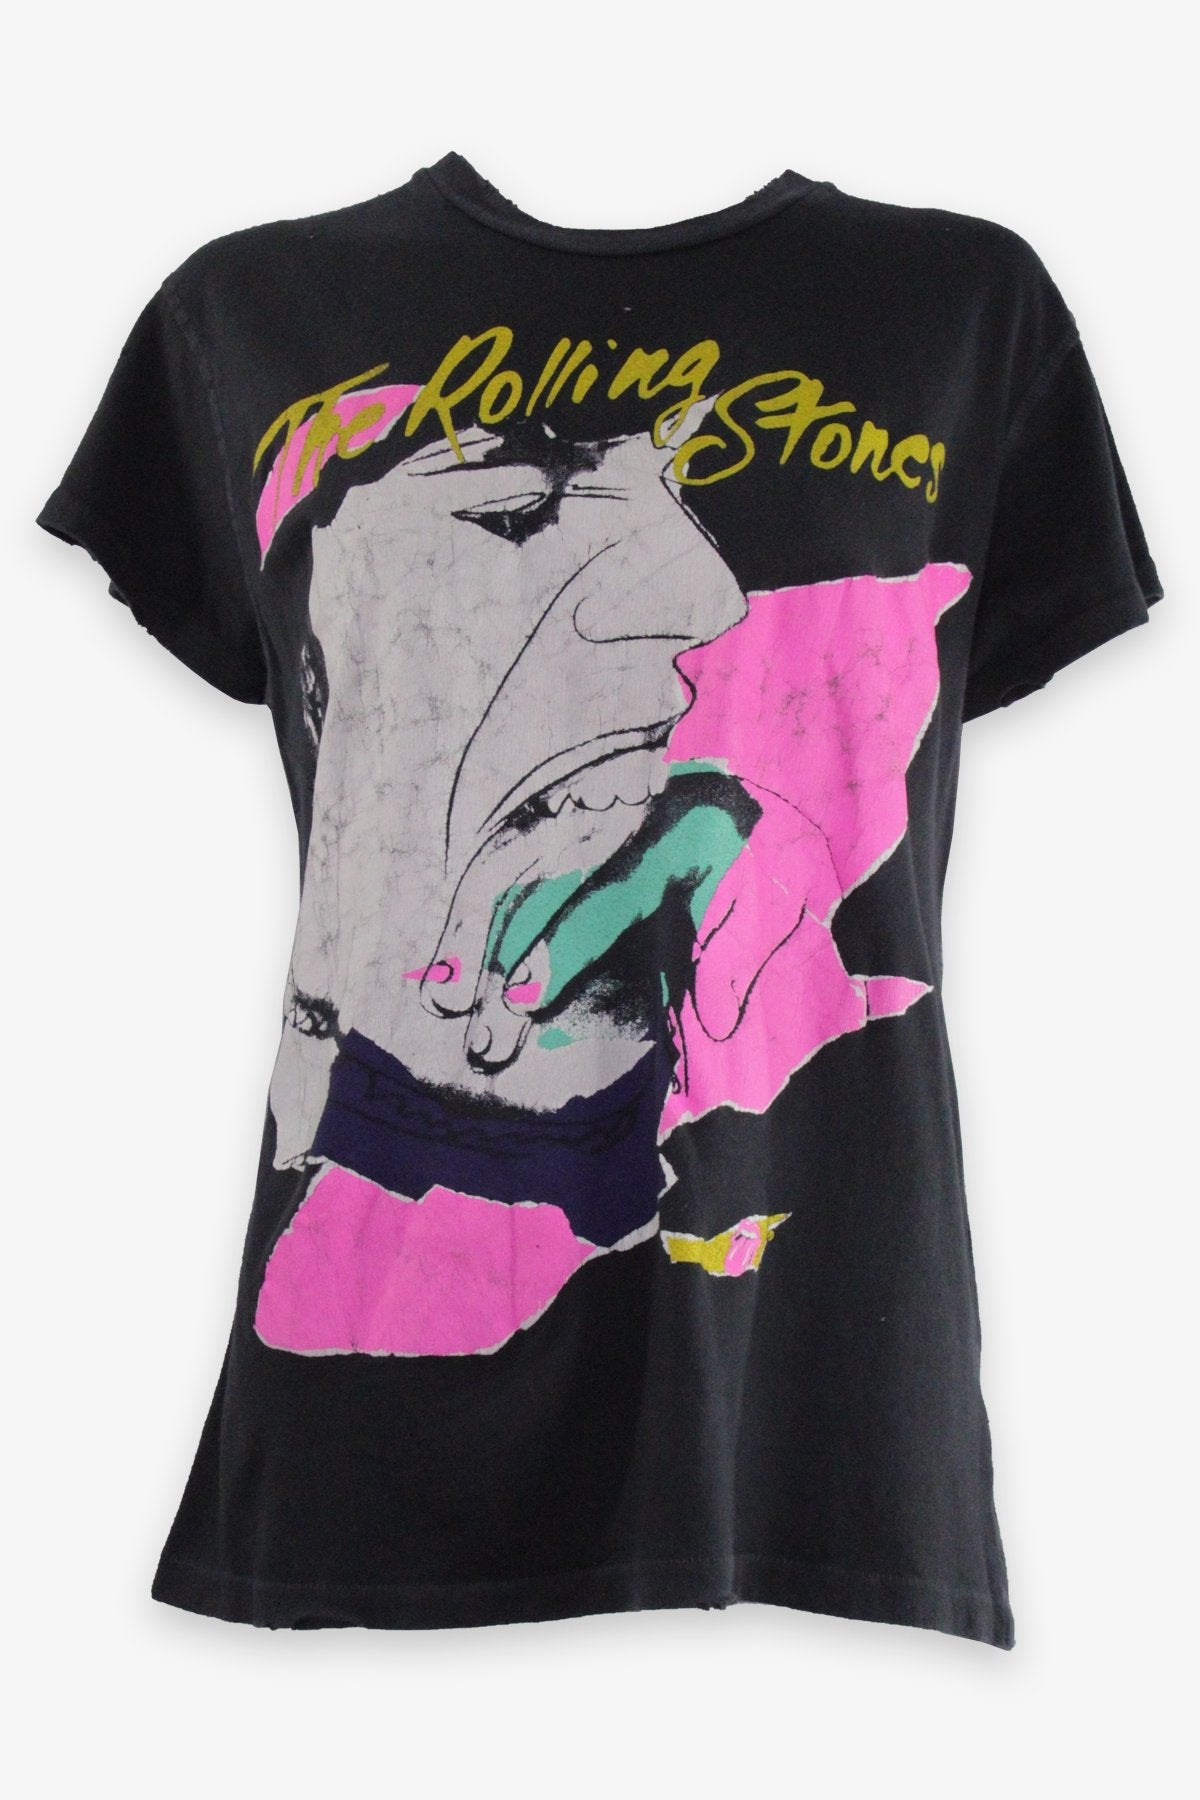 The Rolling Stones "Love You Live" Unisex T-Shirt in Black - shop-olivia.com